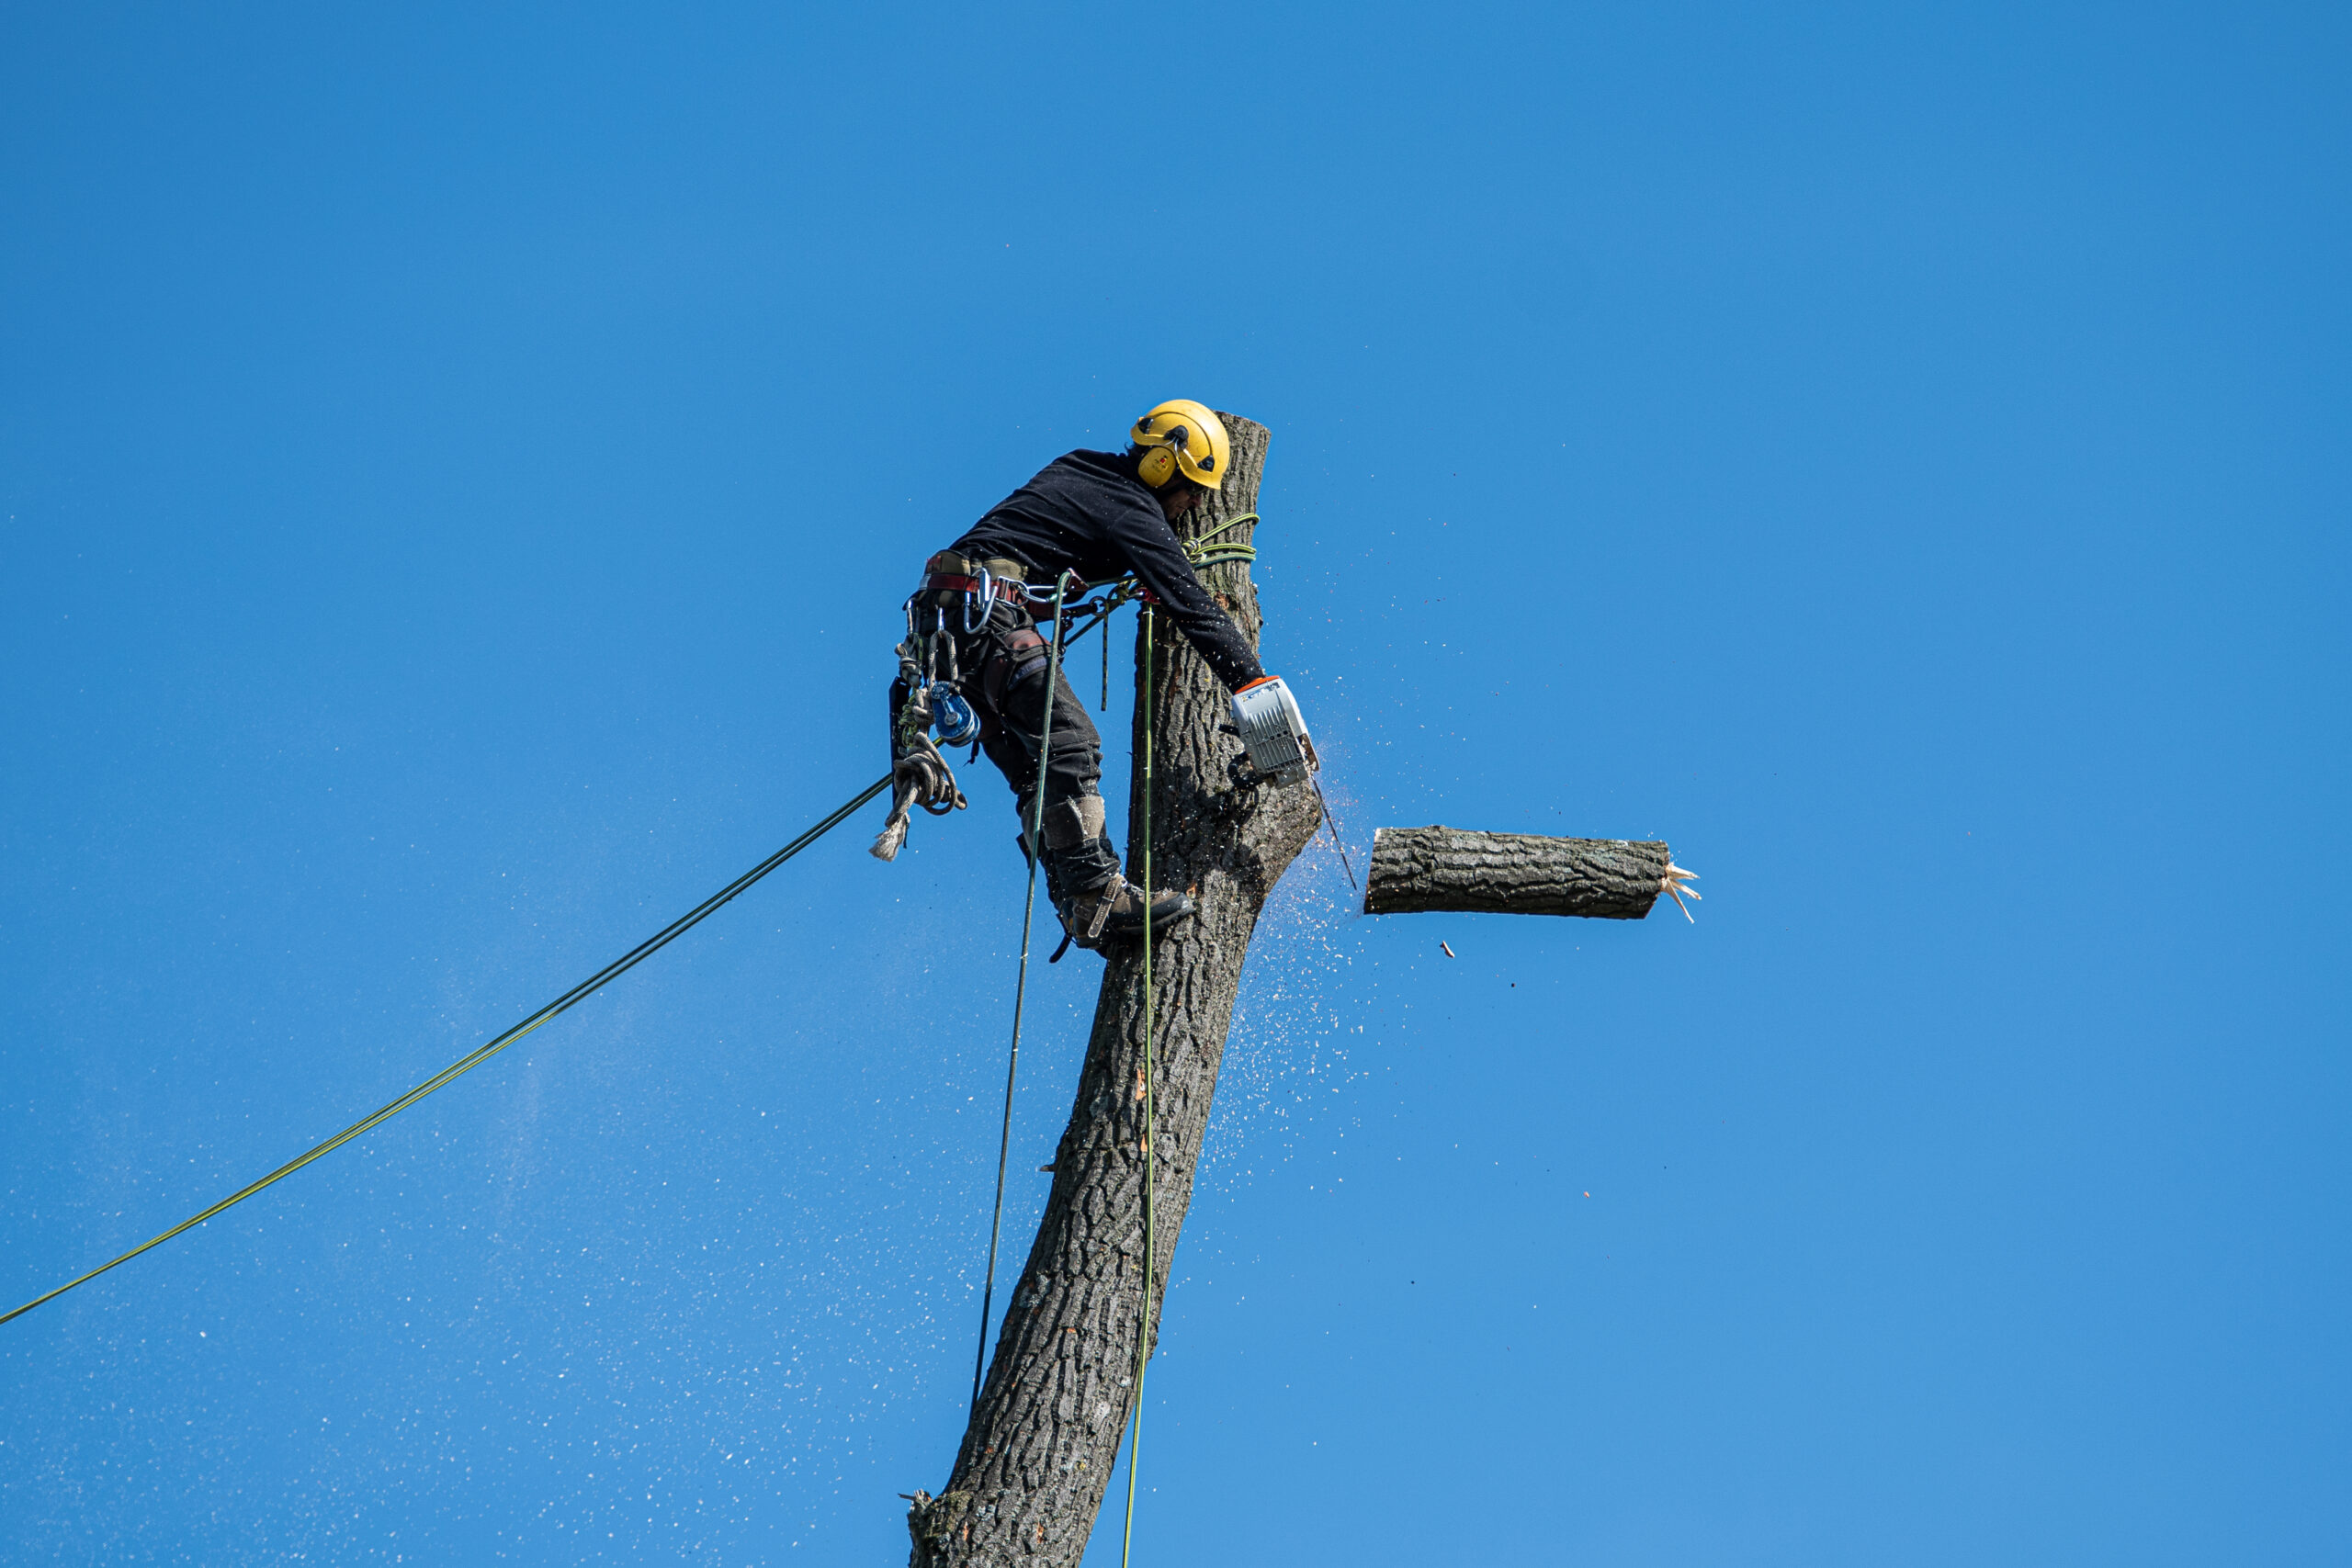 What equipment is used in tree removal?